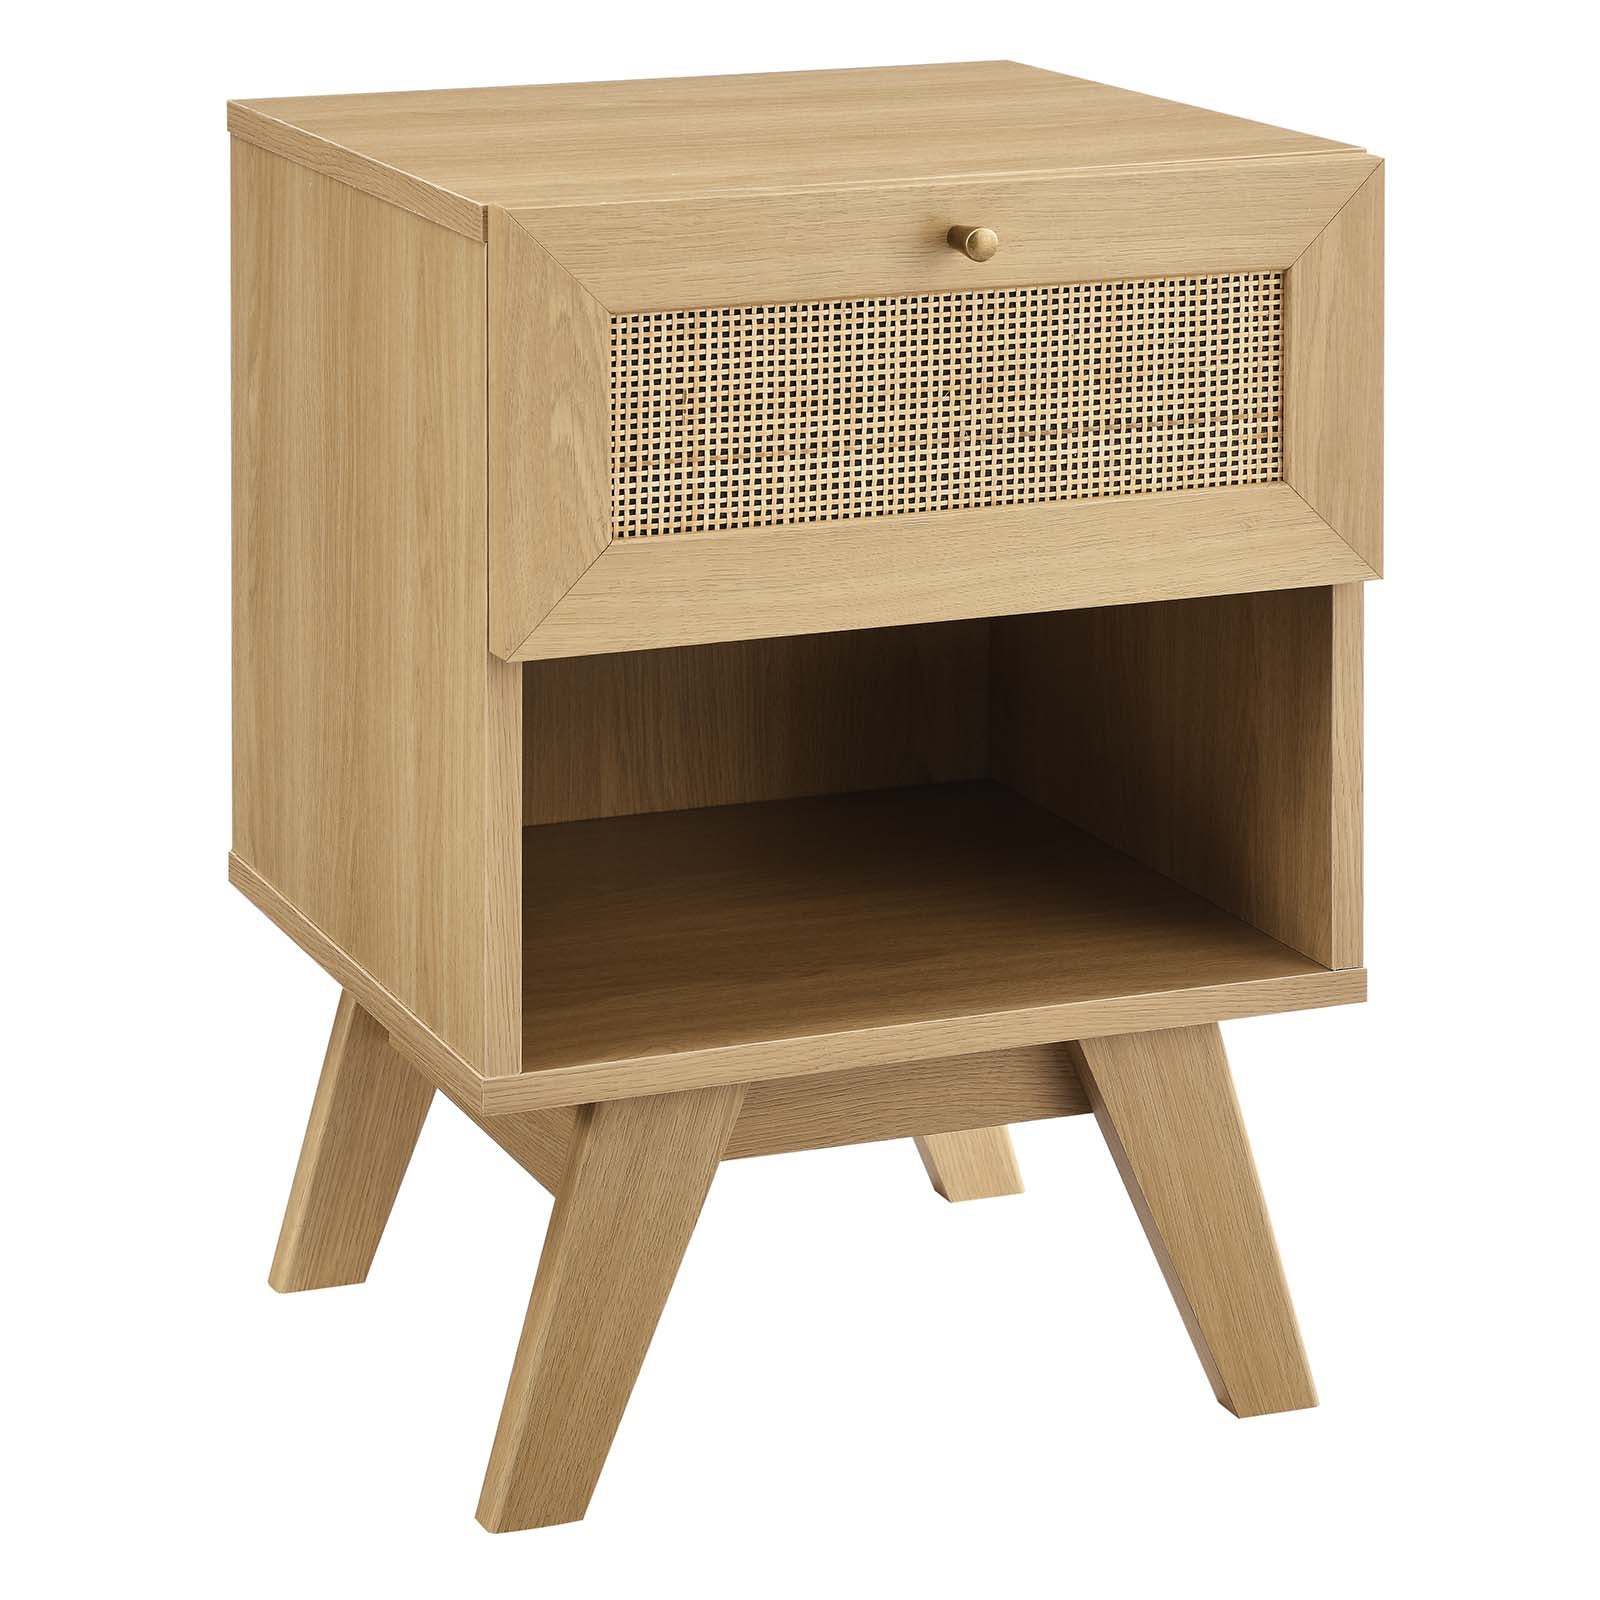 Modway Nightstands & Side Tables - Soma-1-Drawer-Nightstand-Oak